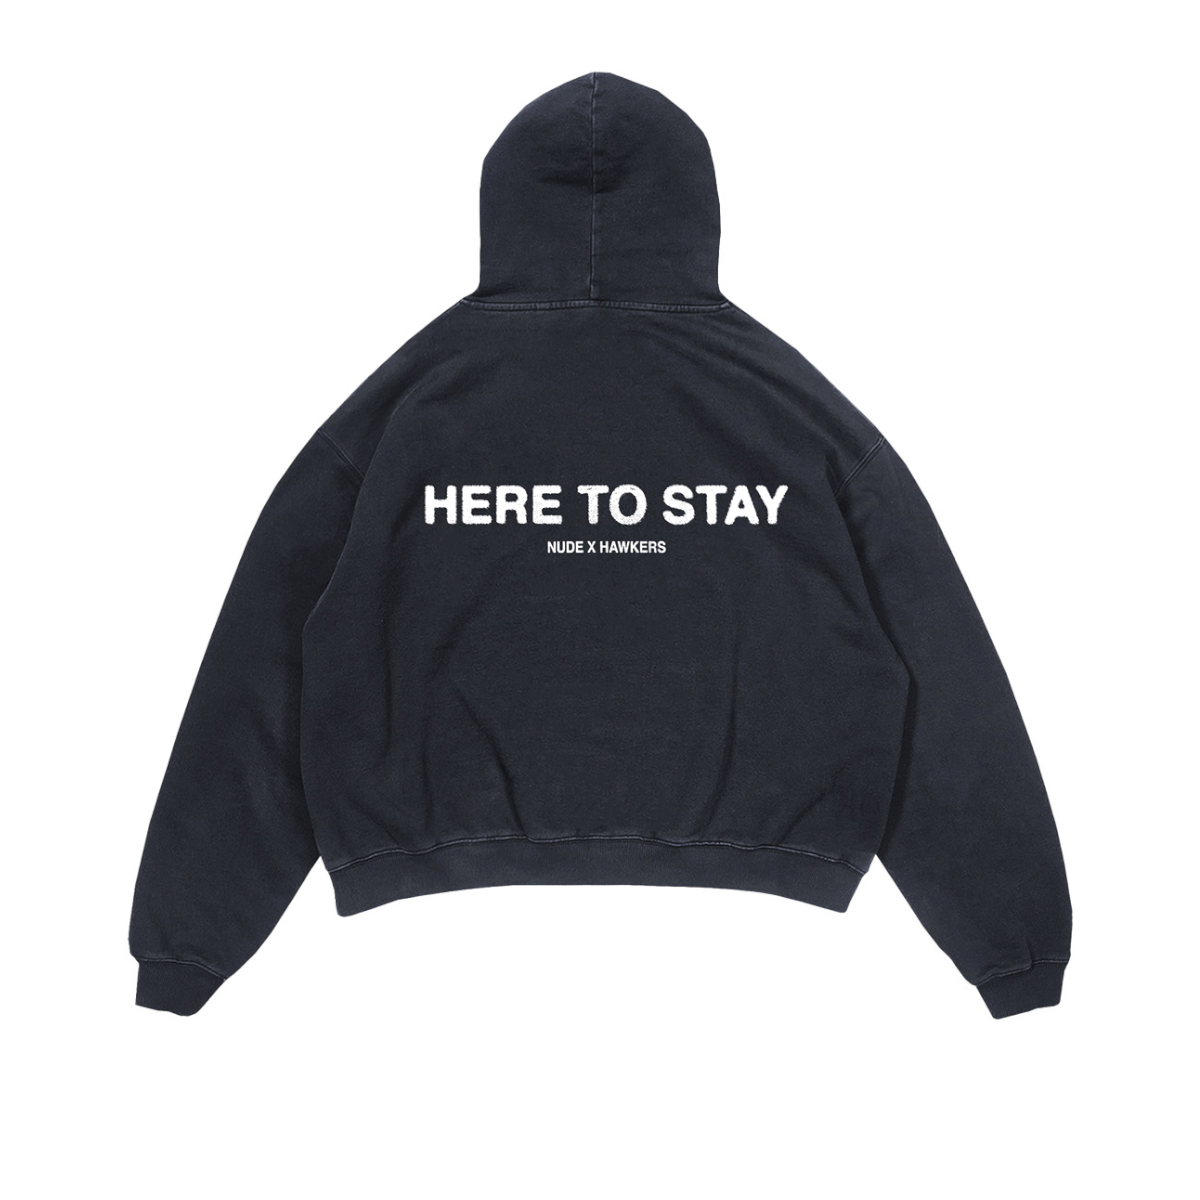 Hawkers X Nude - Here To Stay Hood (l)